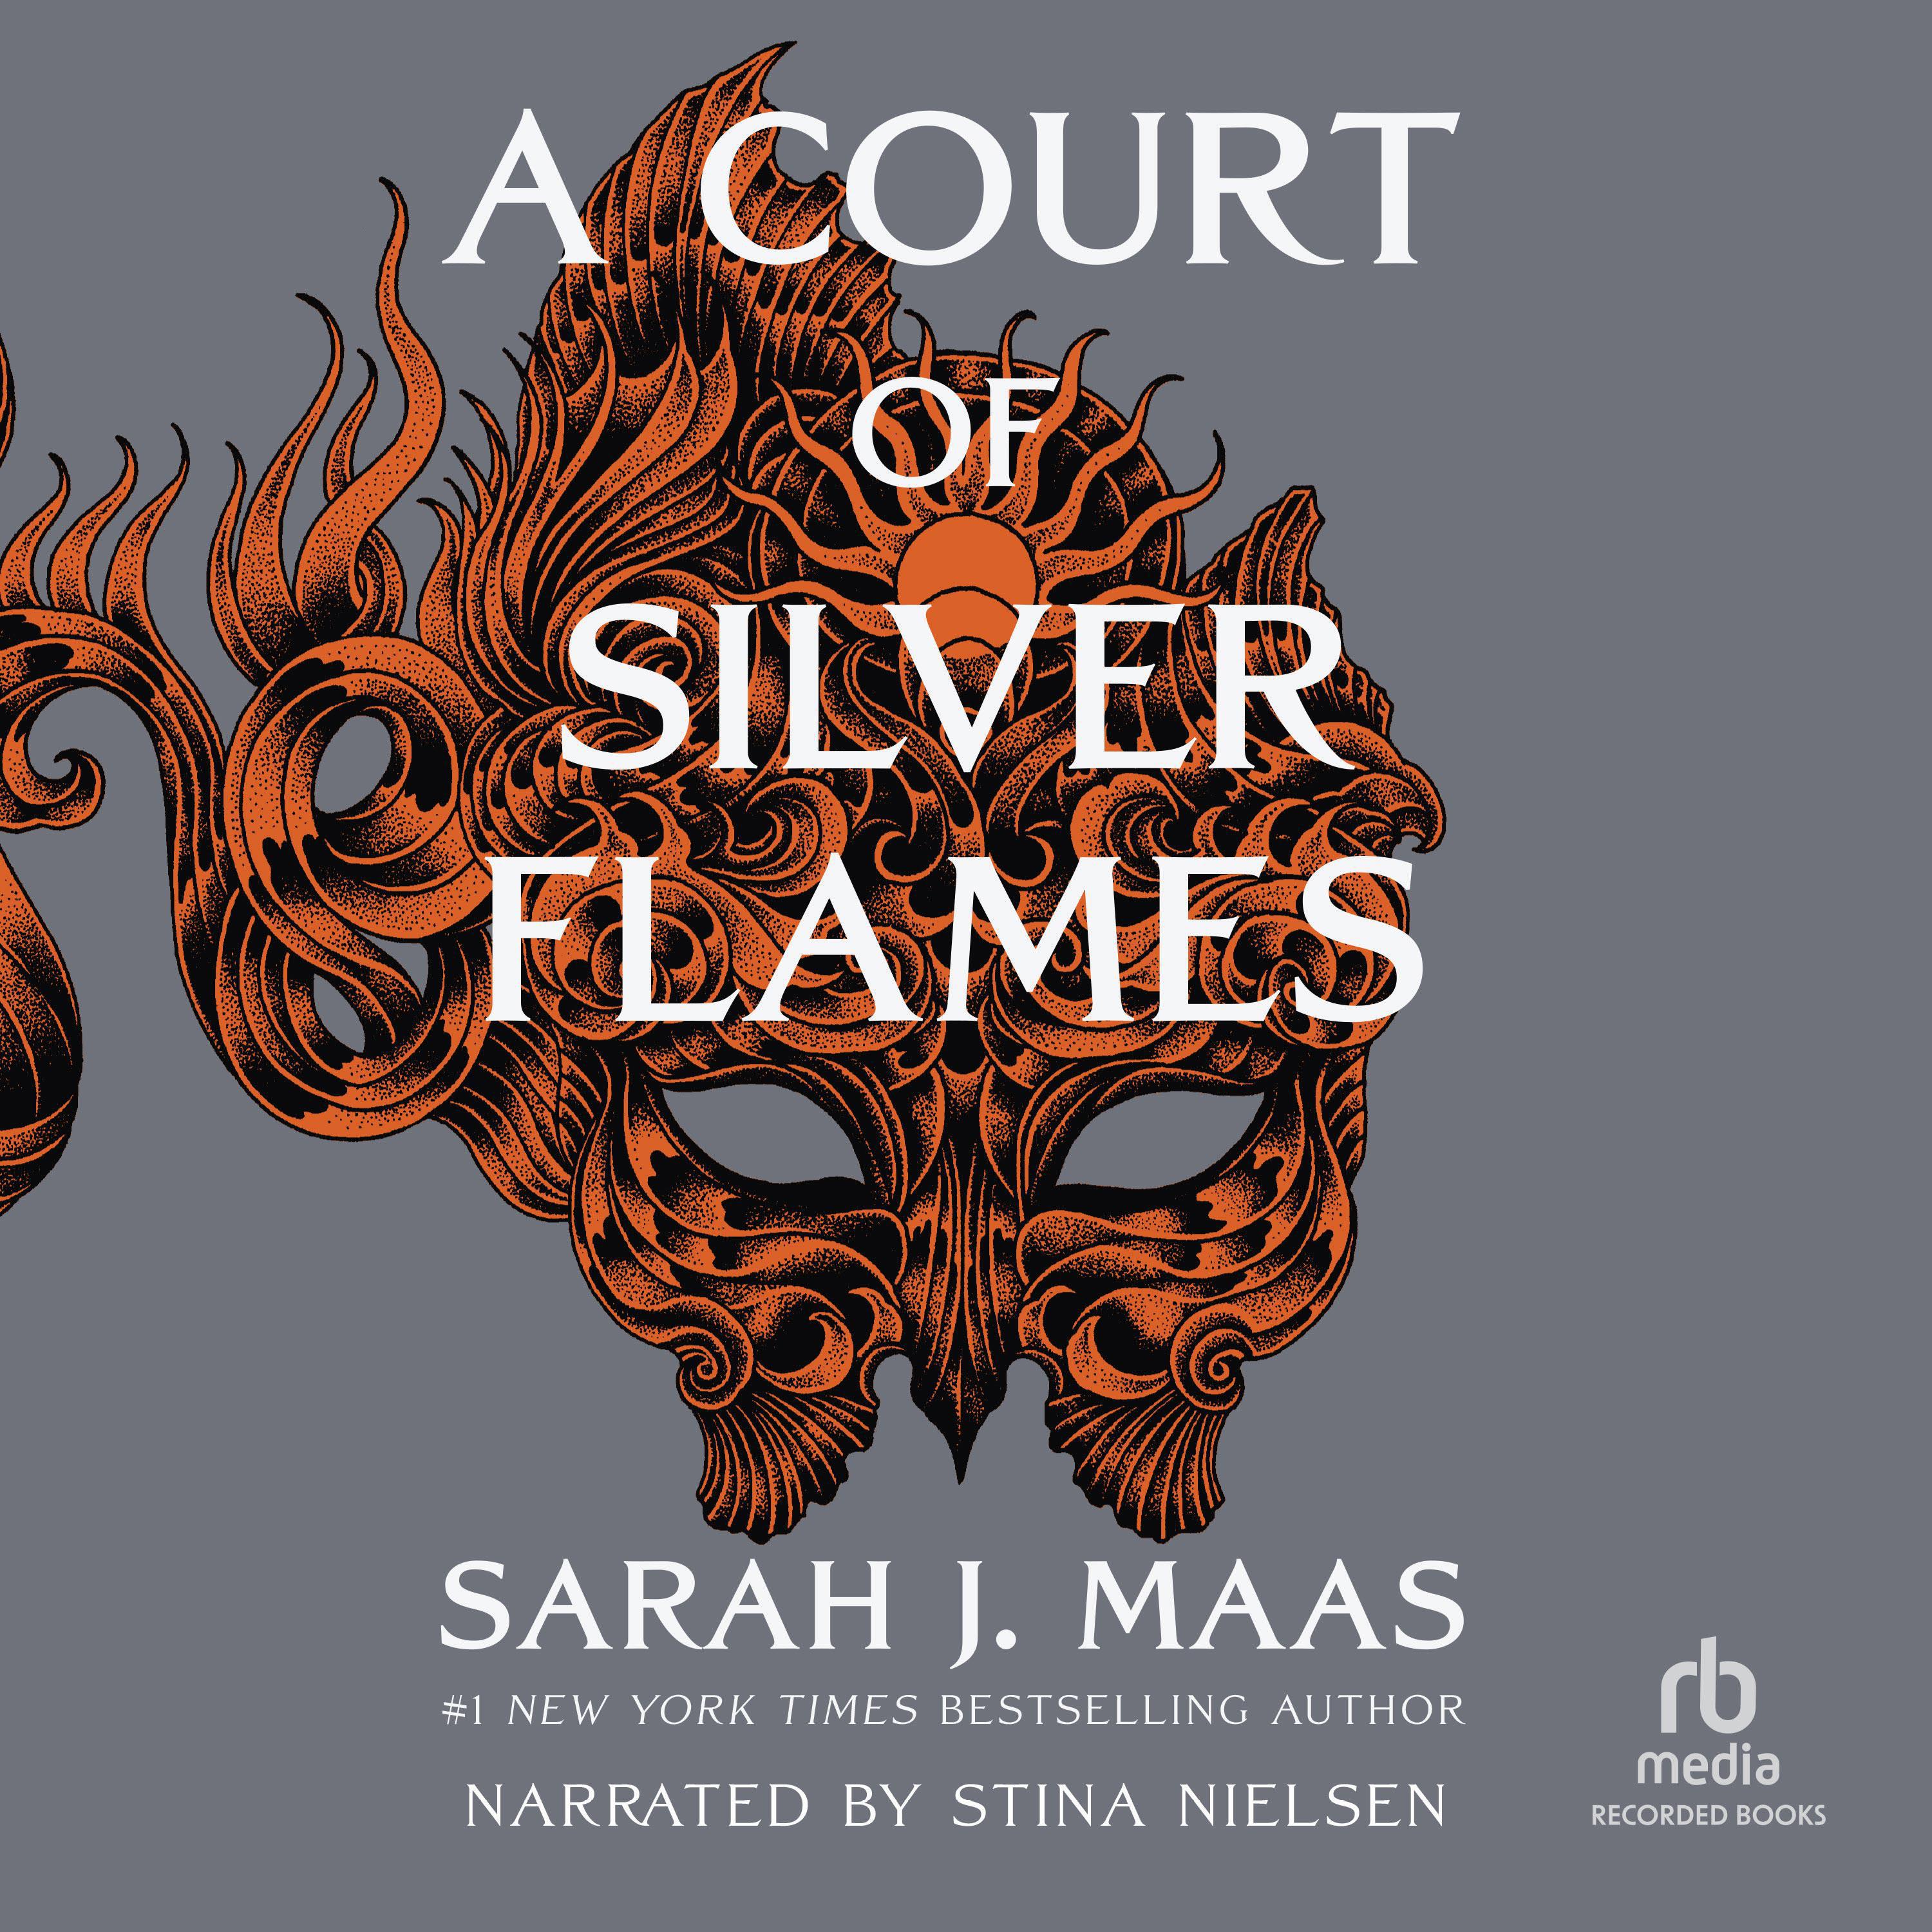 A court of silver flames pdf